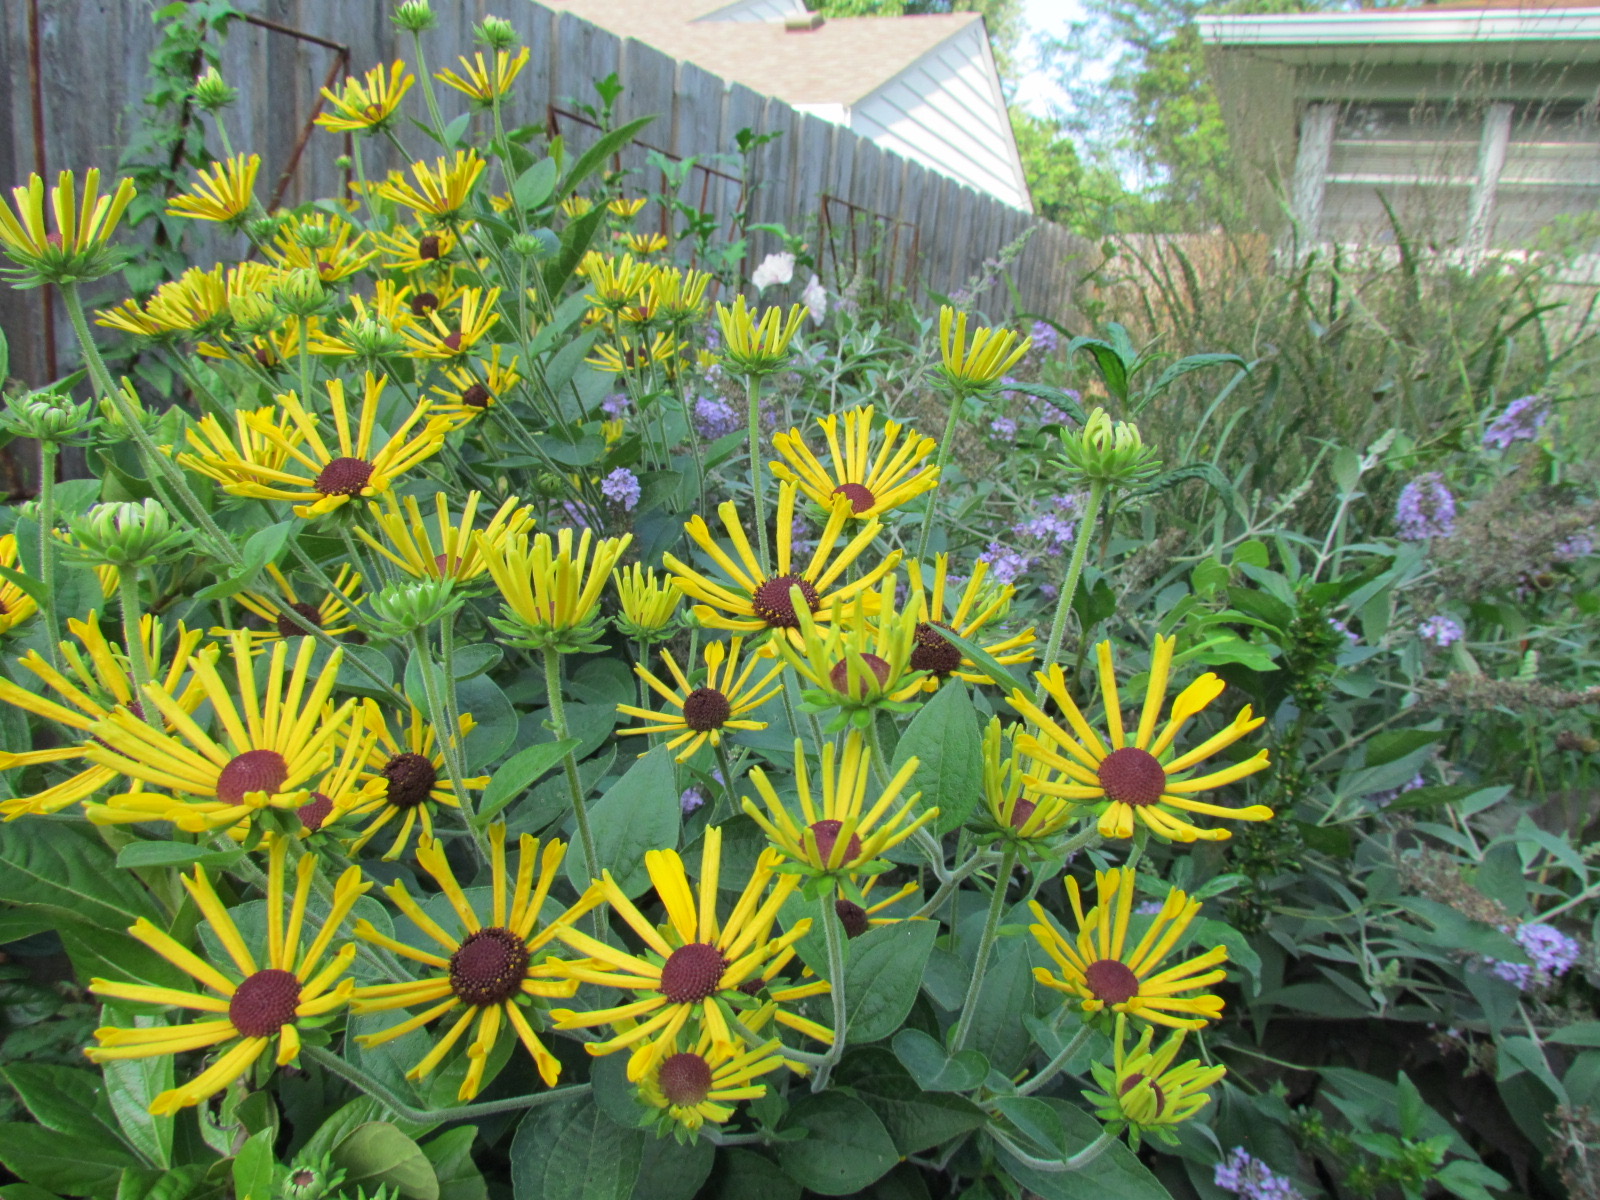 Little Henry rudbeckia has quilled petals.